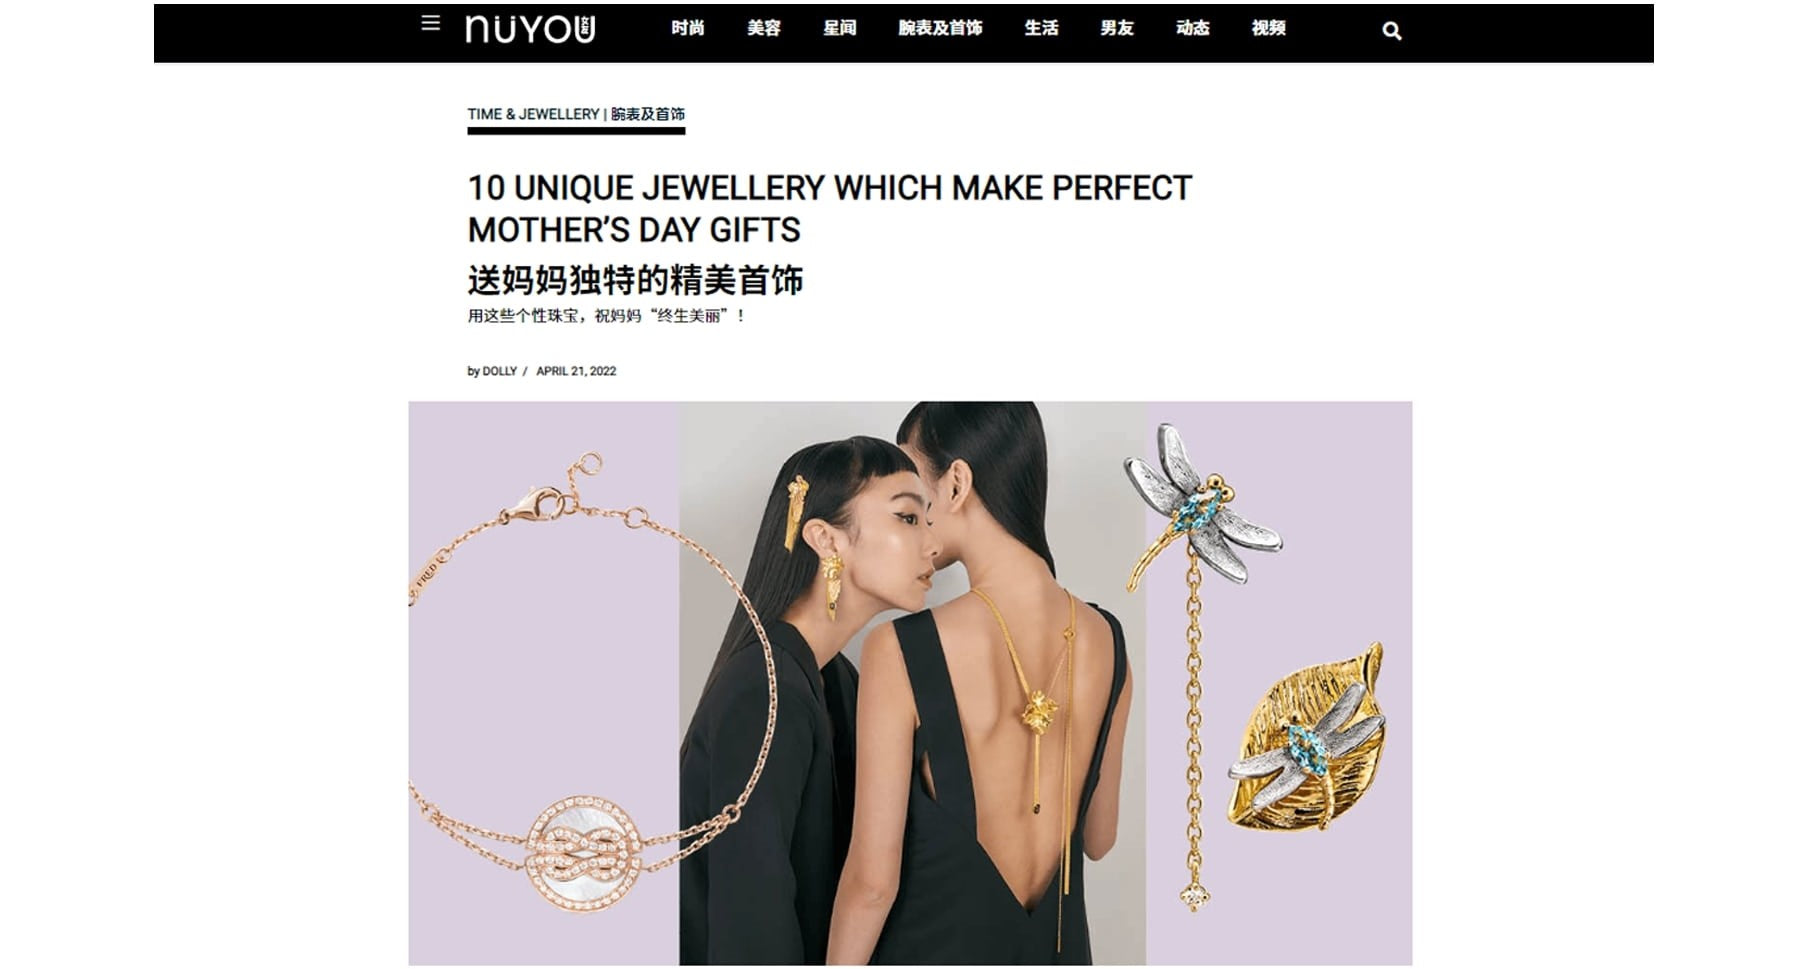 risis-jewellery-iconic-orchids-and-botanique-collection-featured-on-nuyou